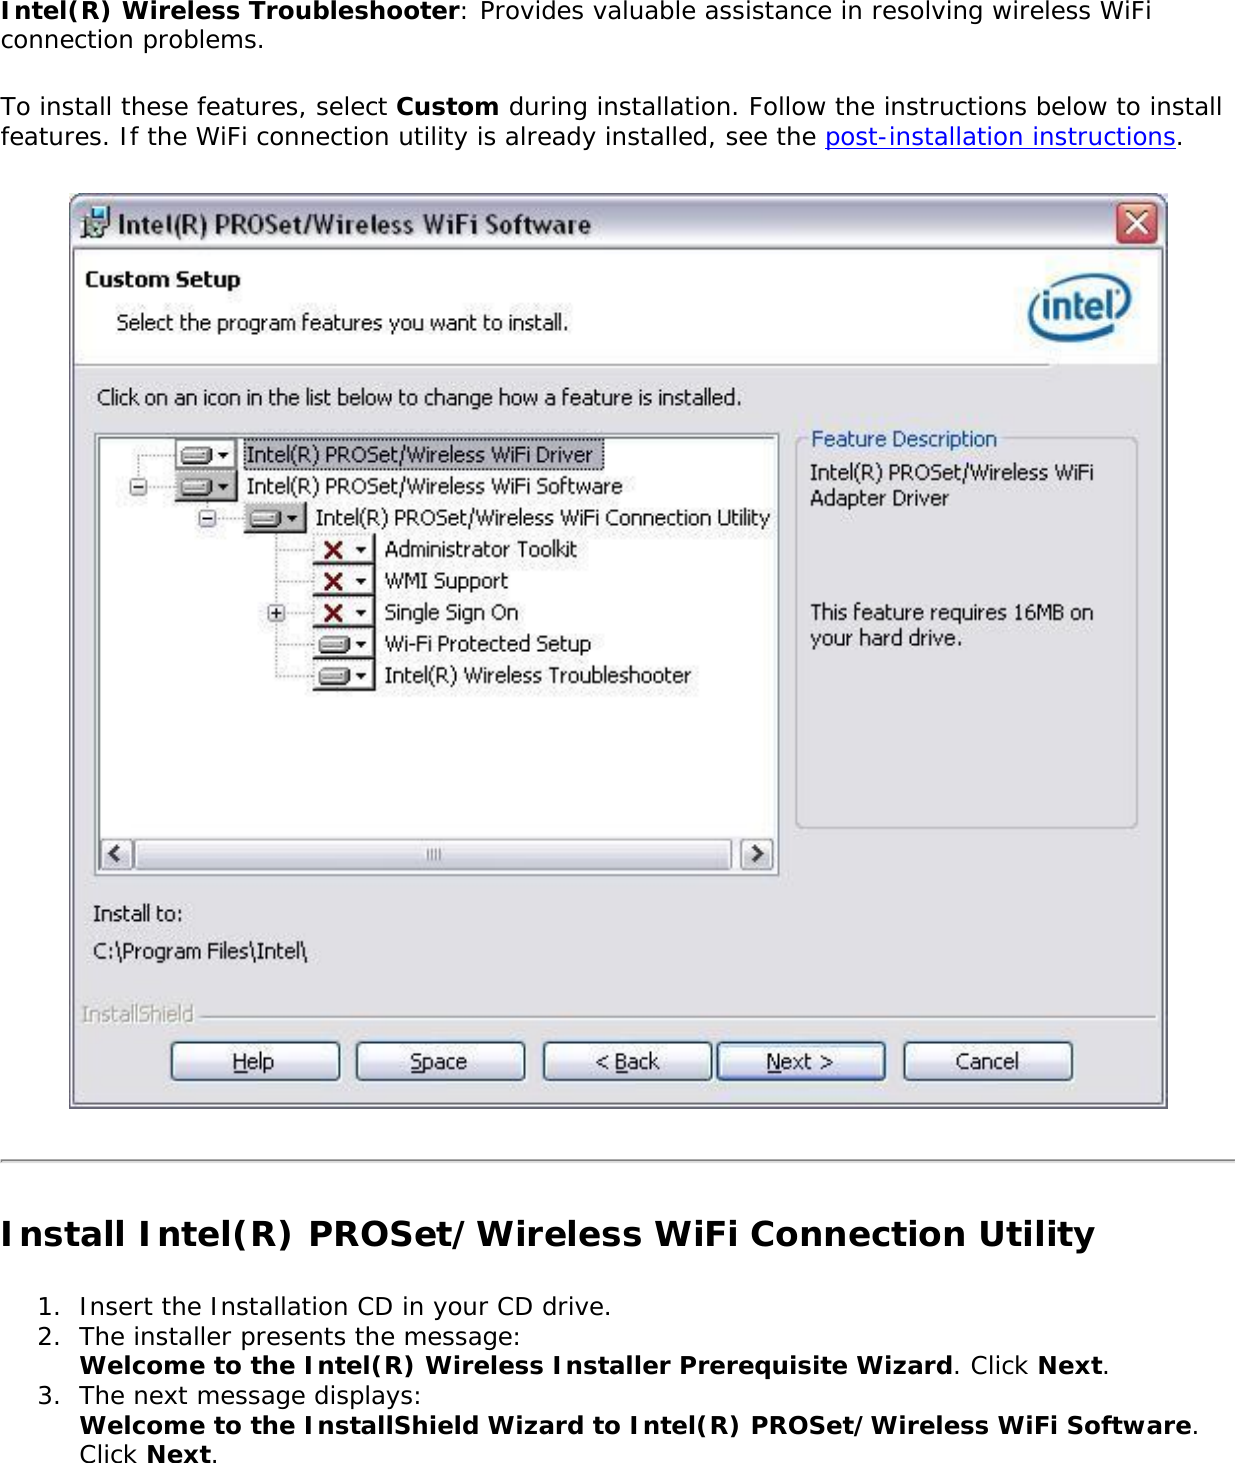 Intel(R) Wireless Troubleshooter: Provides valuable assistance in resolving wireless WiFi connection problems. To install these features, select Custom during installation. Follow the instructions below to install features. If the WiFi connection utility is already installed, see the post-installation instructions.Install Intel(R) PROSet/Wireless WiFi Connection Utility1.  Insert the Installation CD in your CD drive.2.  The installer presents the message:  Welcome to the Intel(R) Wireless Installer Prerequisite Wizard. Click Next.3.  The next message displays:  Welcome to the InstallShield Wizard to Intel(R) PROSet/Wireless WiFi Software. Click Next. 